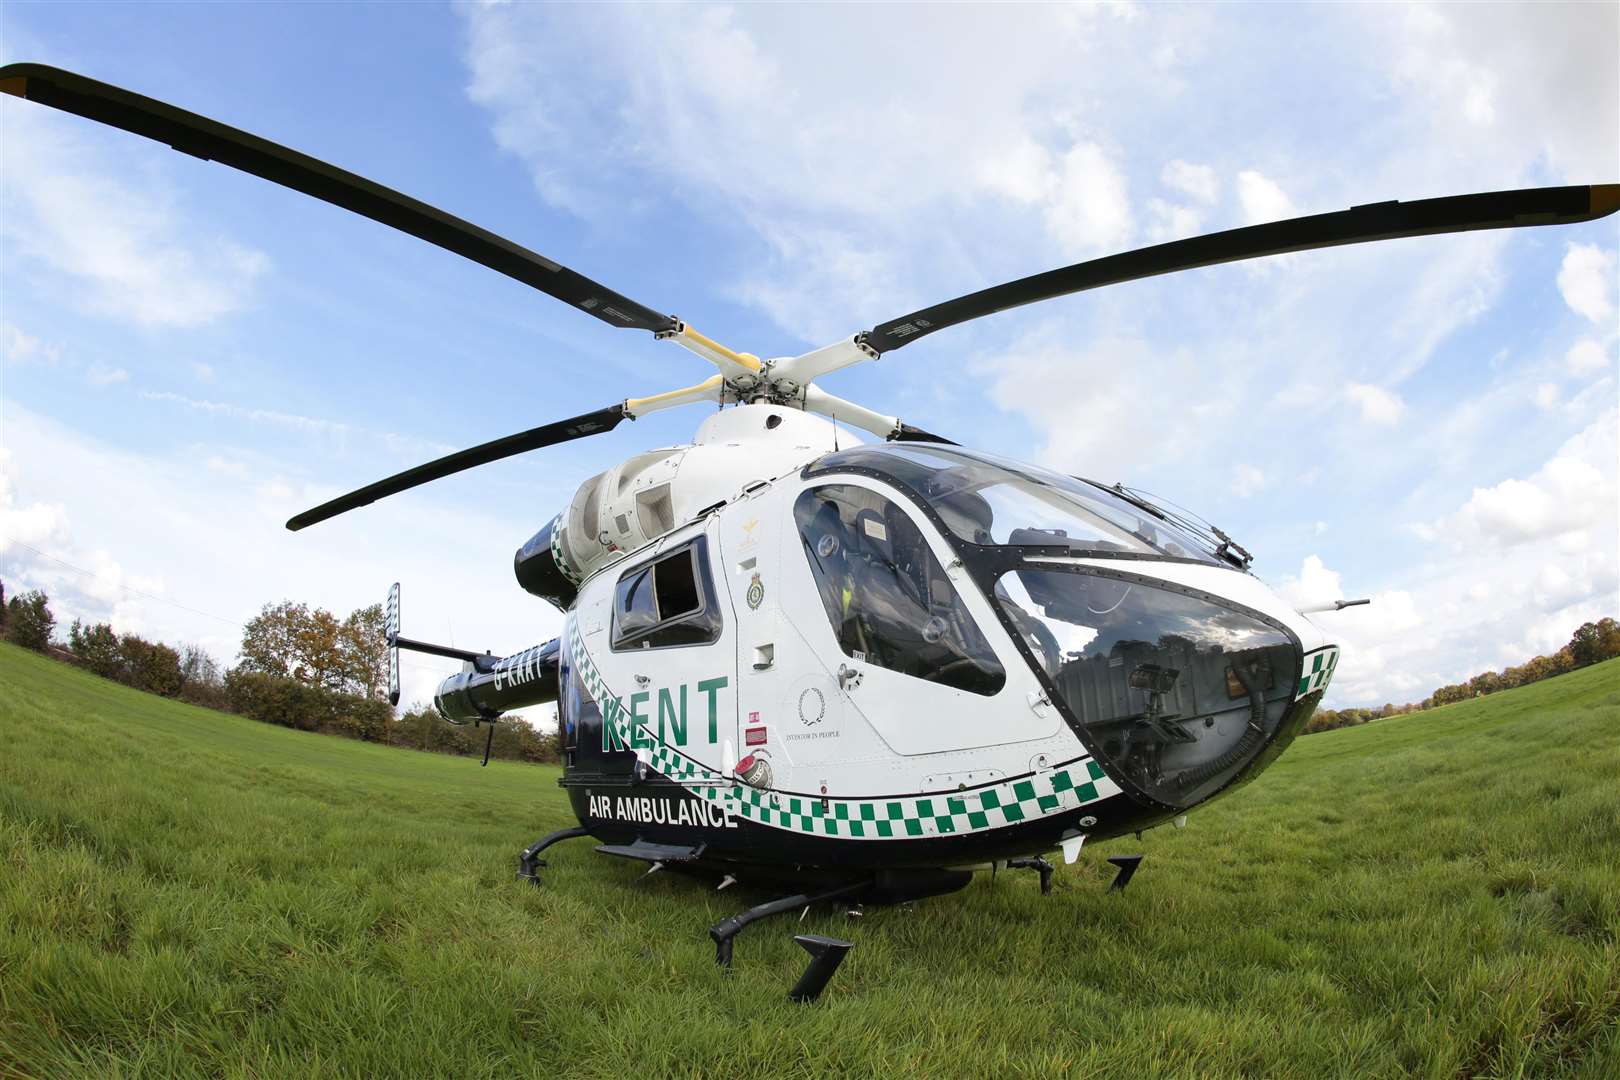 Air Ambulance lands at the new site